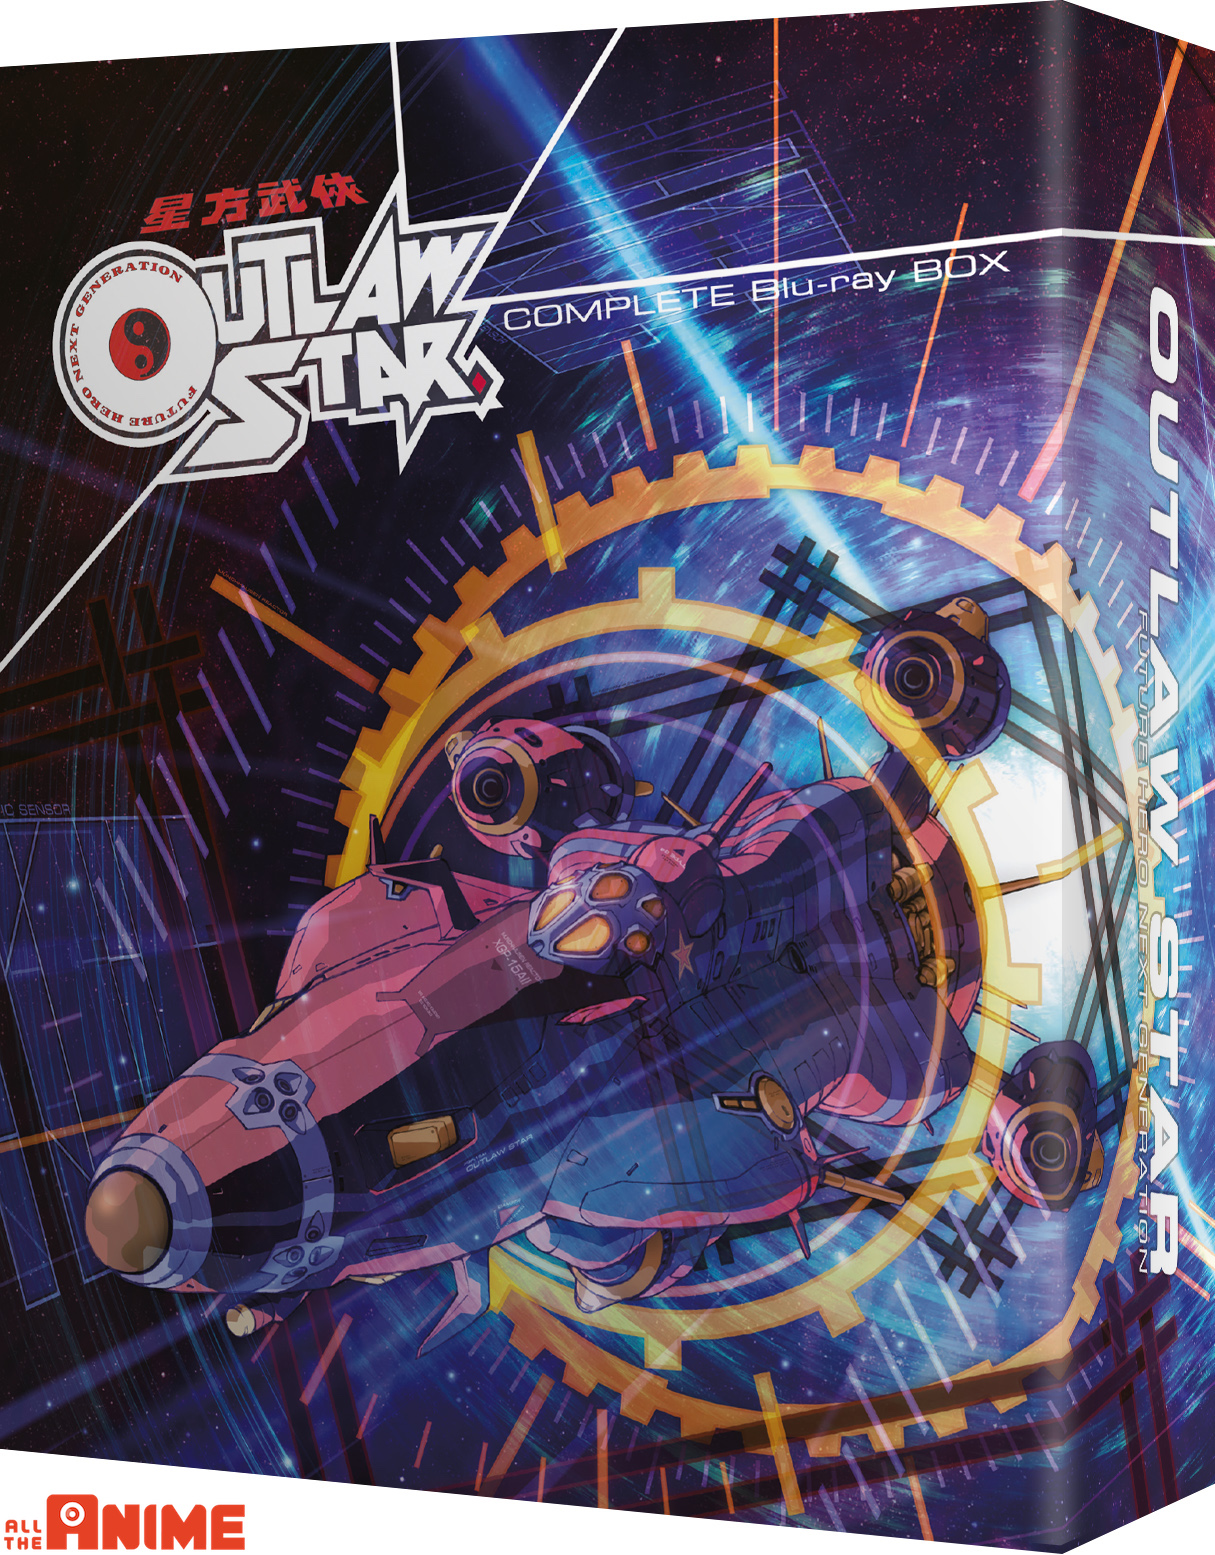 Outlaw Star #9